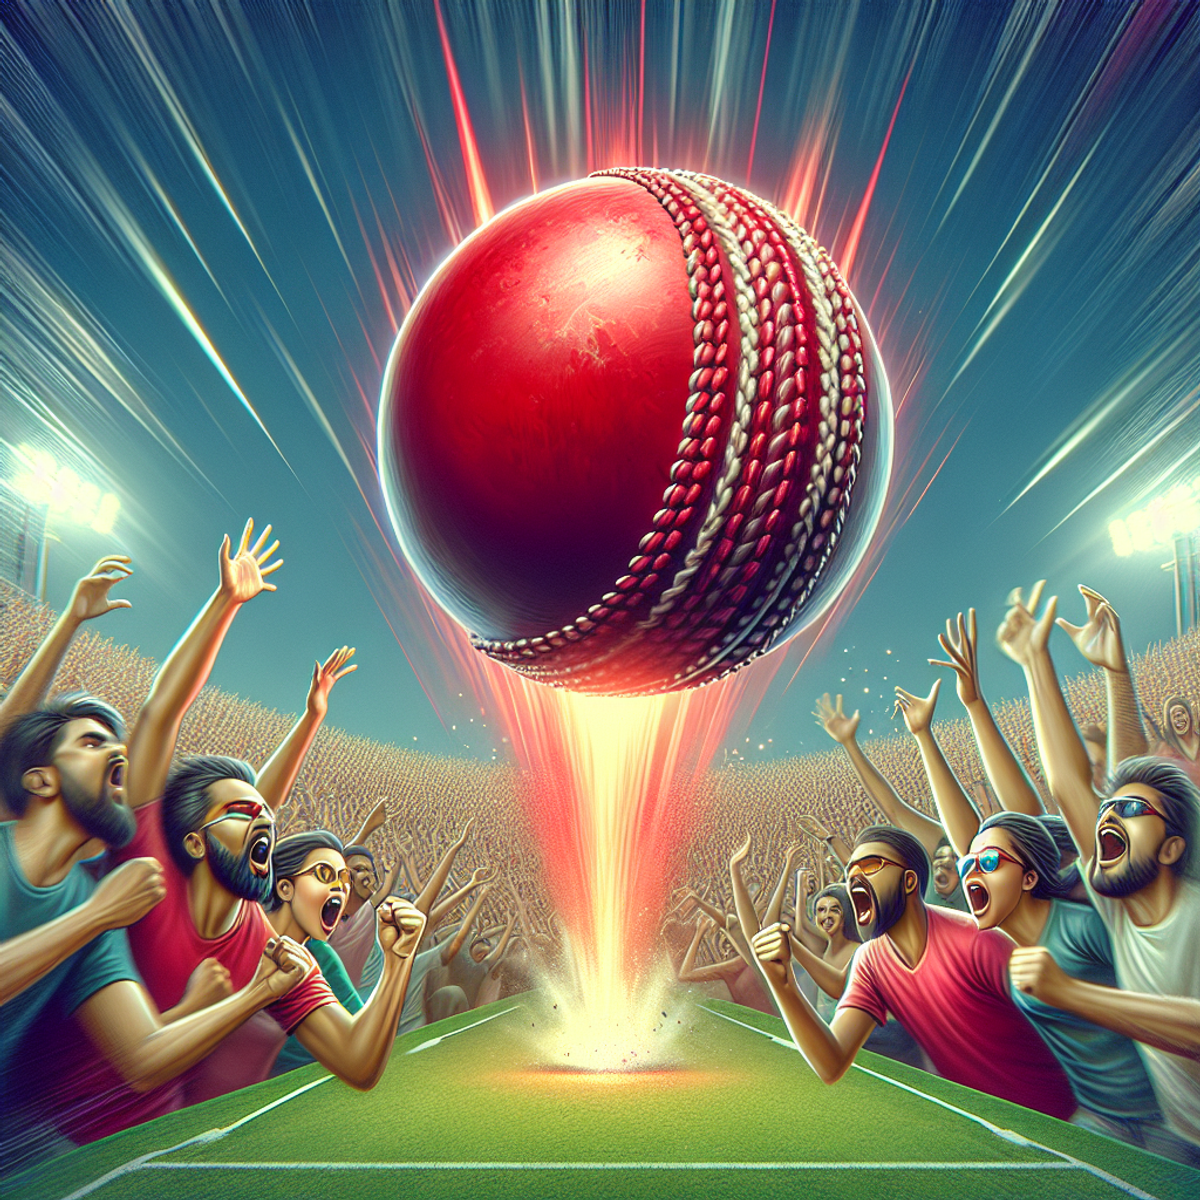 Excited cricket fans cheering as a red ball soars through the air during a game.